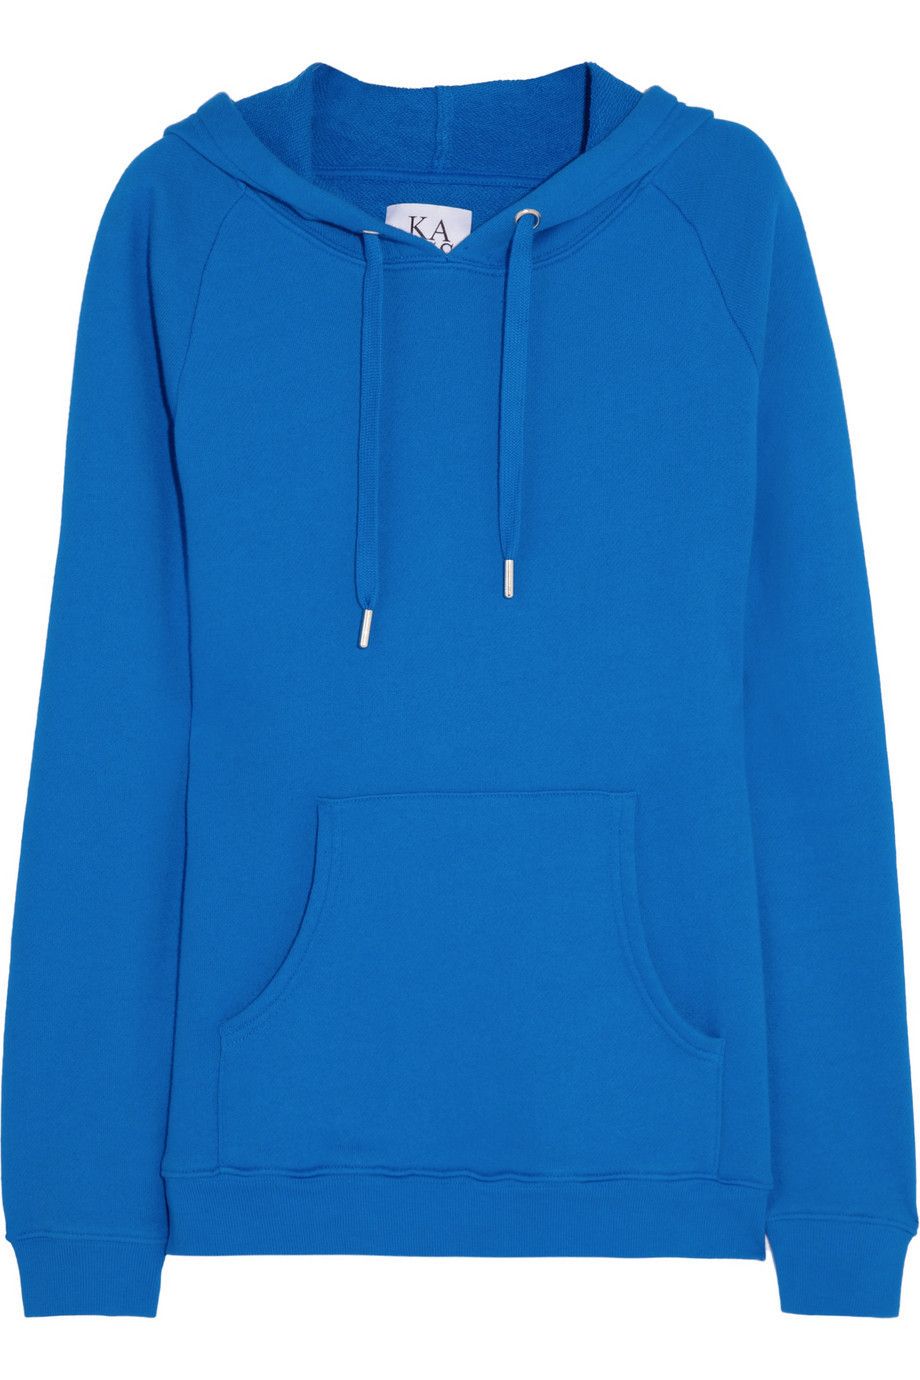 Blue, Product, Sleeve, Textile, Outerwear, White, Collar, Jacket, Electric blue, Sweatshirt, 